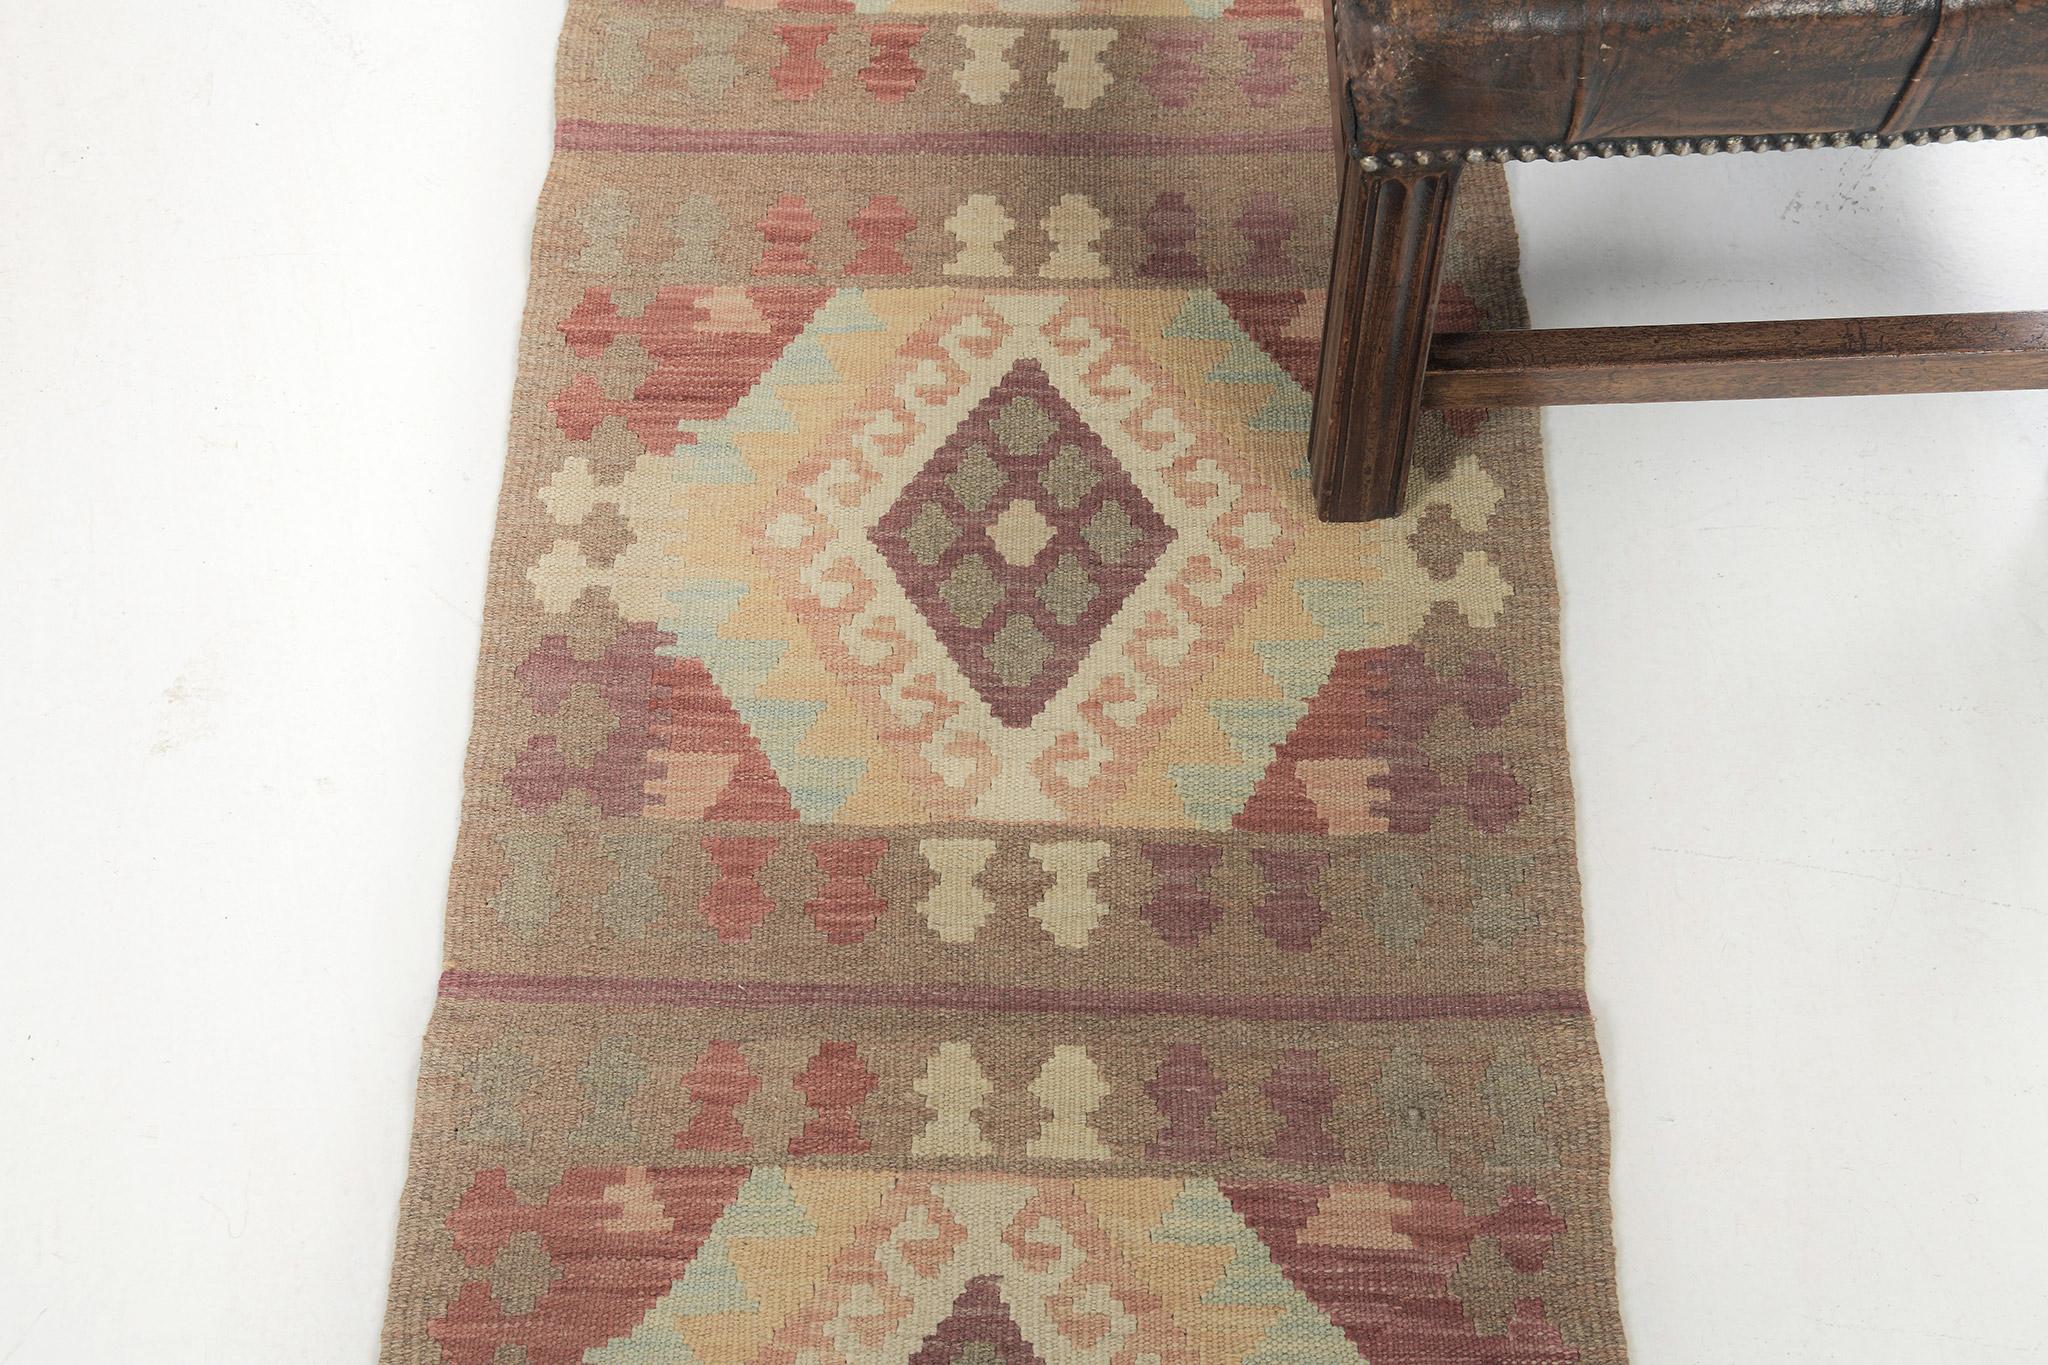 A stunning vintage-styled flatweave Kilim features tribal motifs through a warm-toned palette. The multicolored patterns create a festive and charming design for a variety of interiors. This such kinds of rugs bring your room more exquisite.

Rug